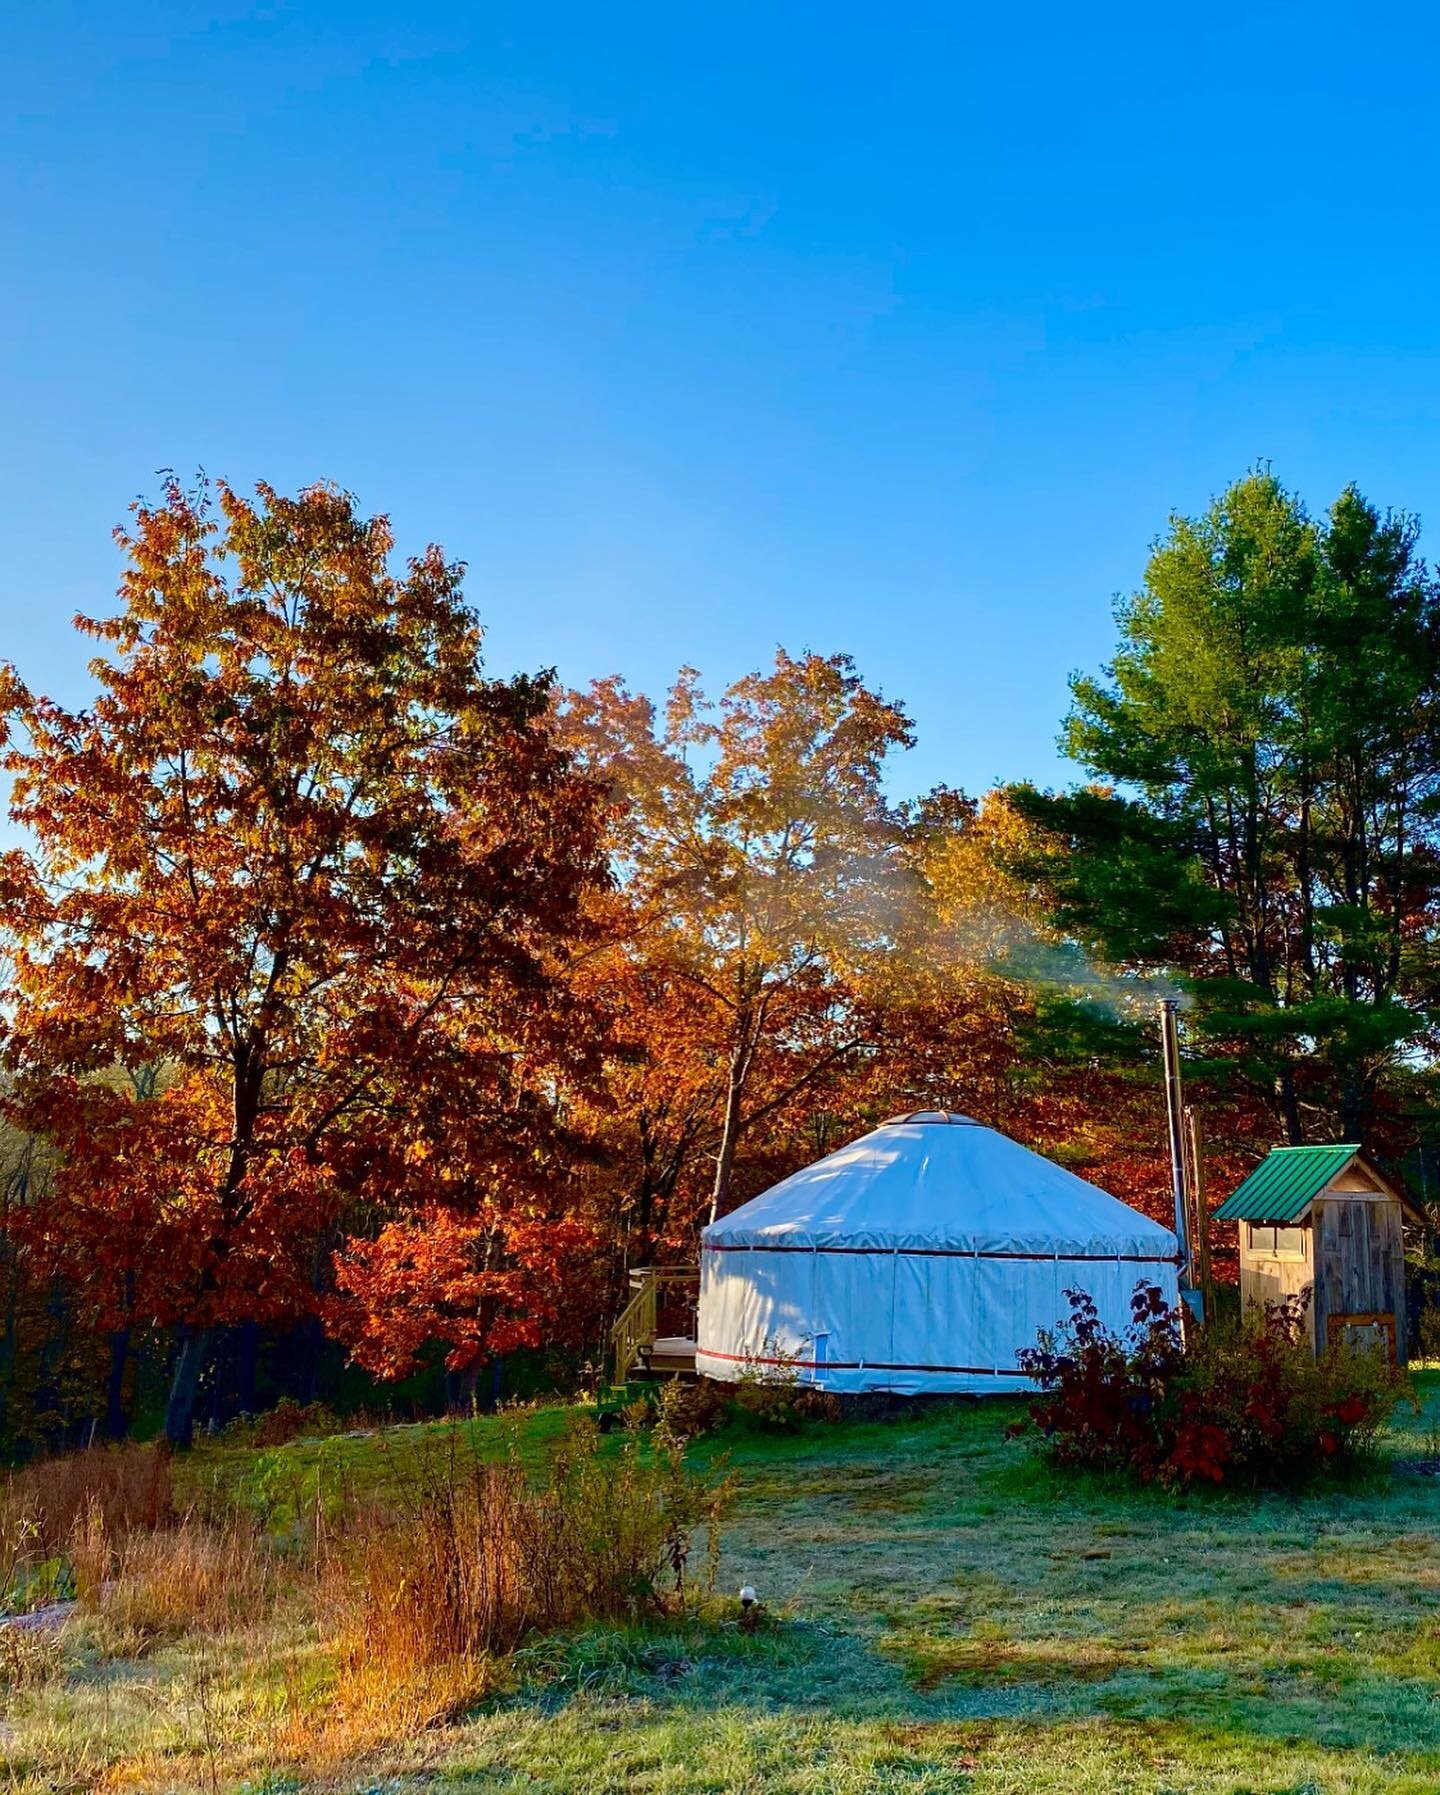 Inside/outside during the most glorious days of the year 🍂 October 22 and 23 are open in the yurt,  and the last three days of the month are open in both the yurt and the cottage - pack your woolens, some red wine and your hiking boots and come join